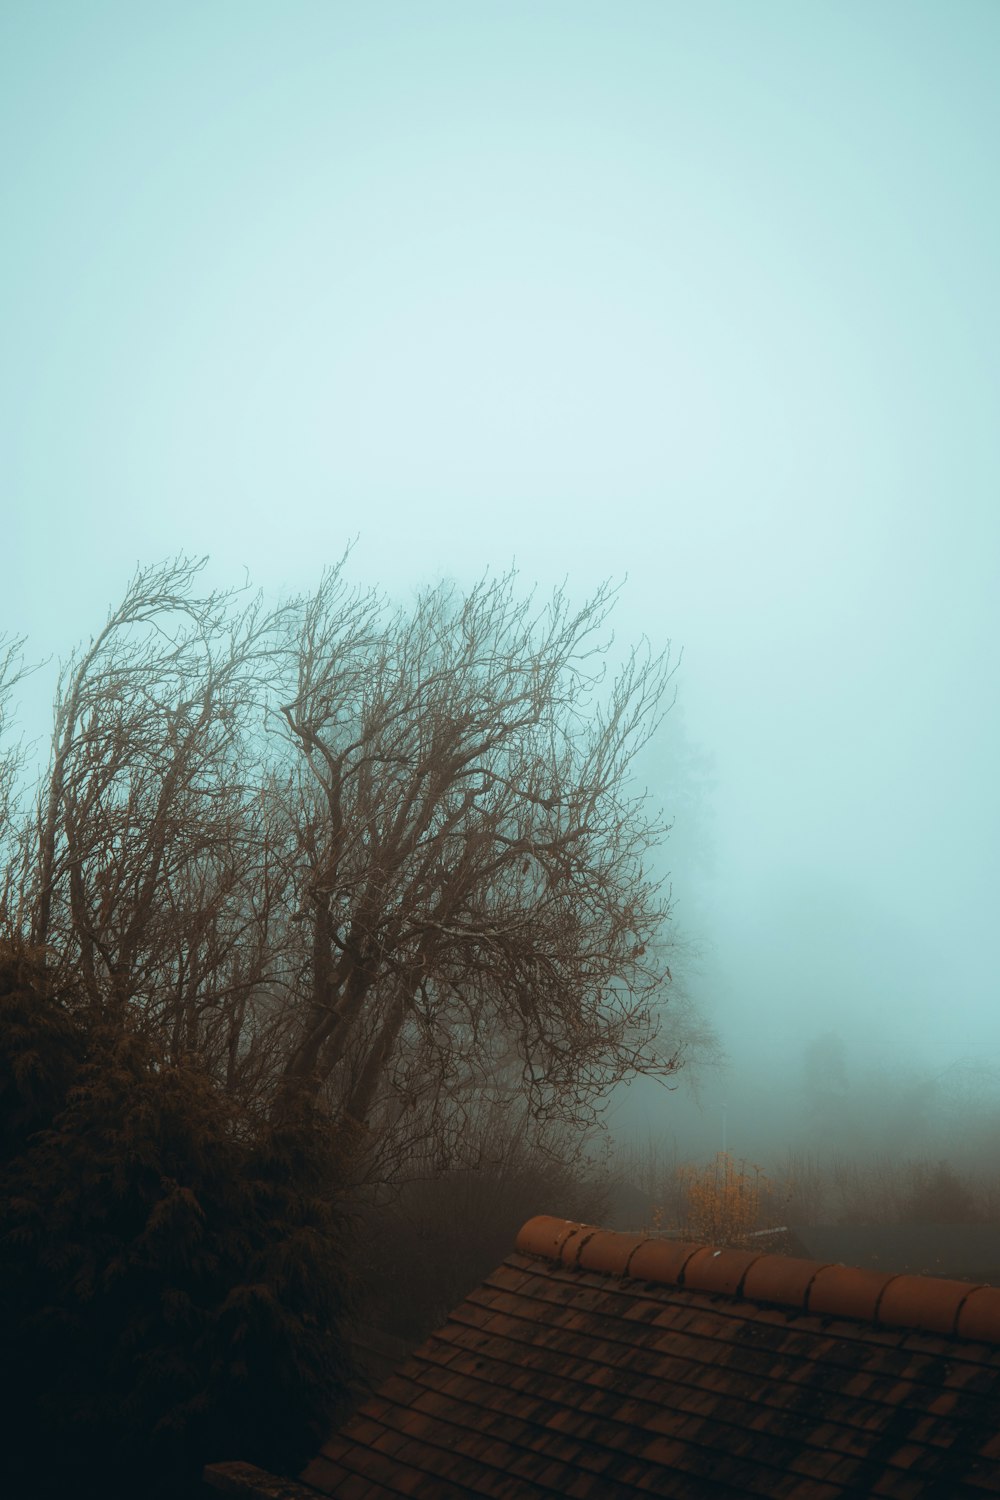 a foggy day with a tree in the foreground